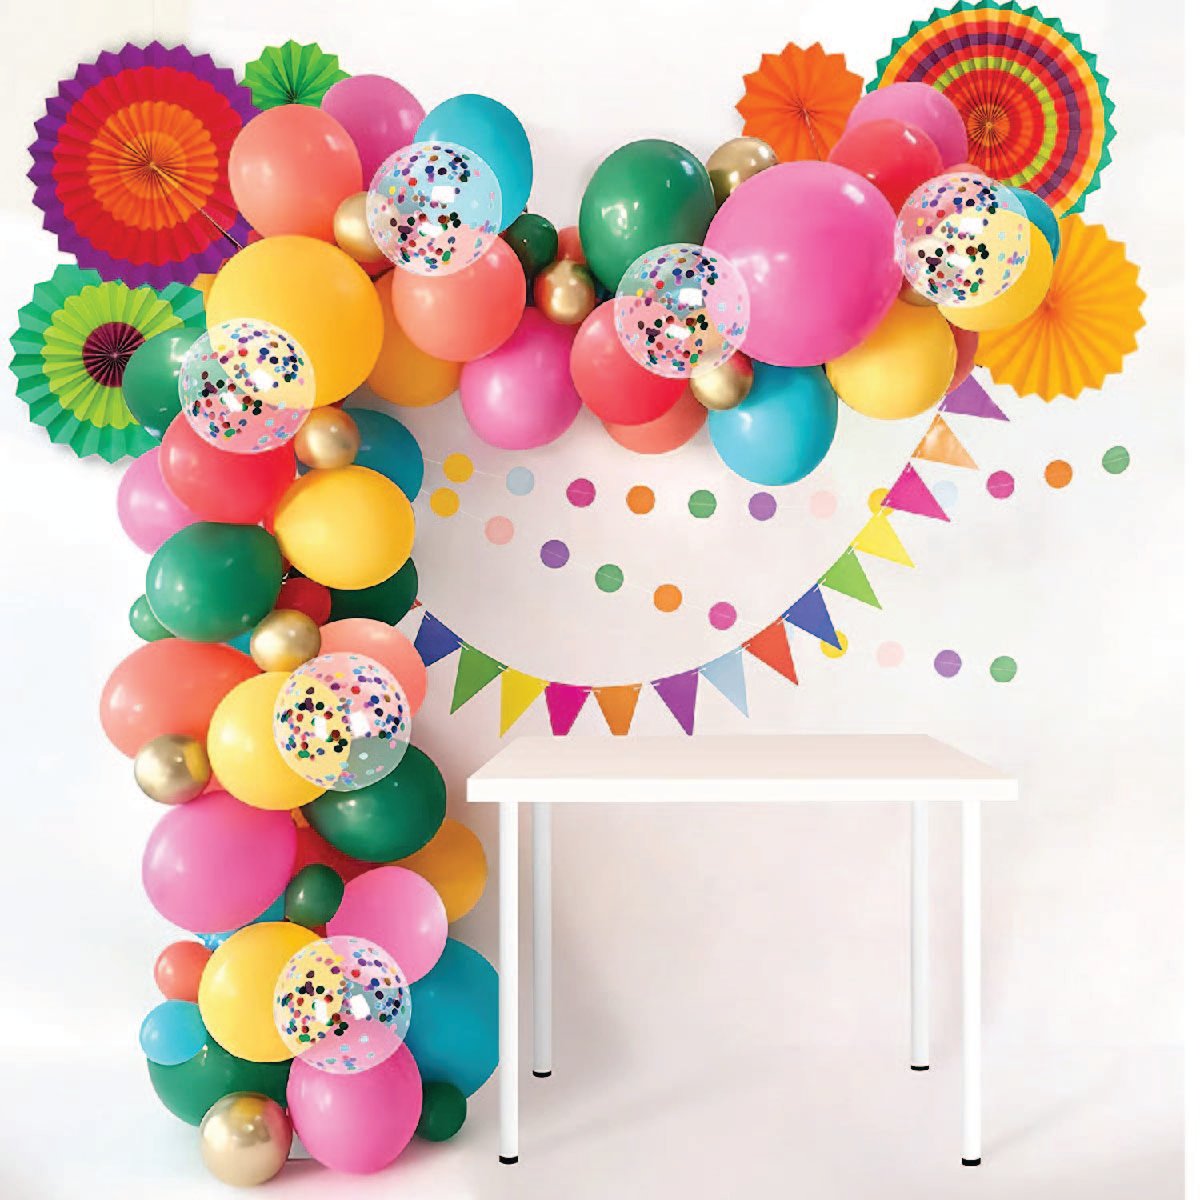 A strand of several different colored balloons with paper fans and banners against a white wall and above a small white table.